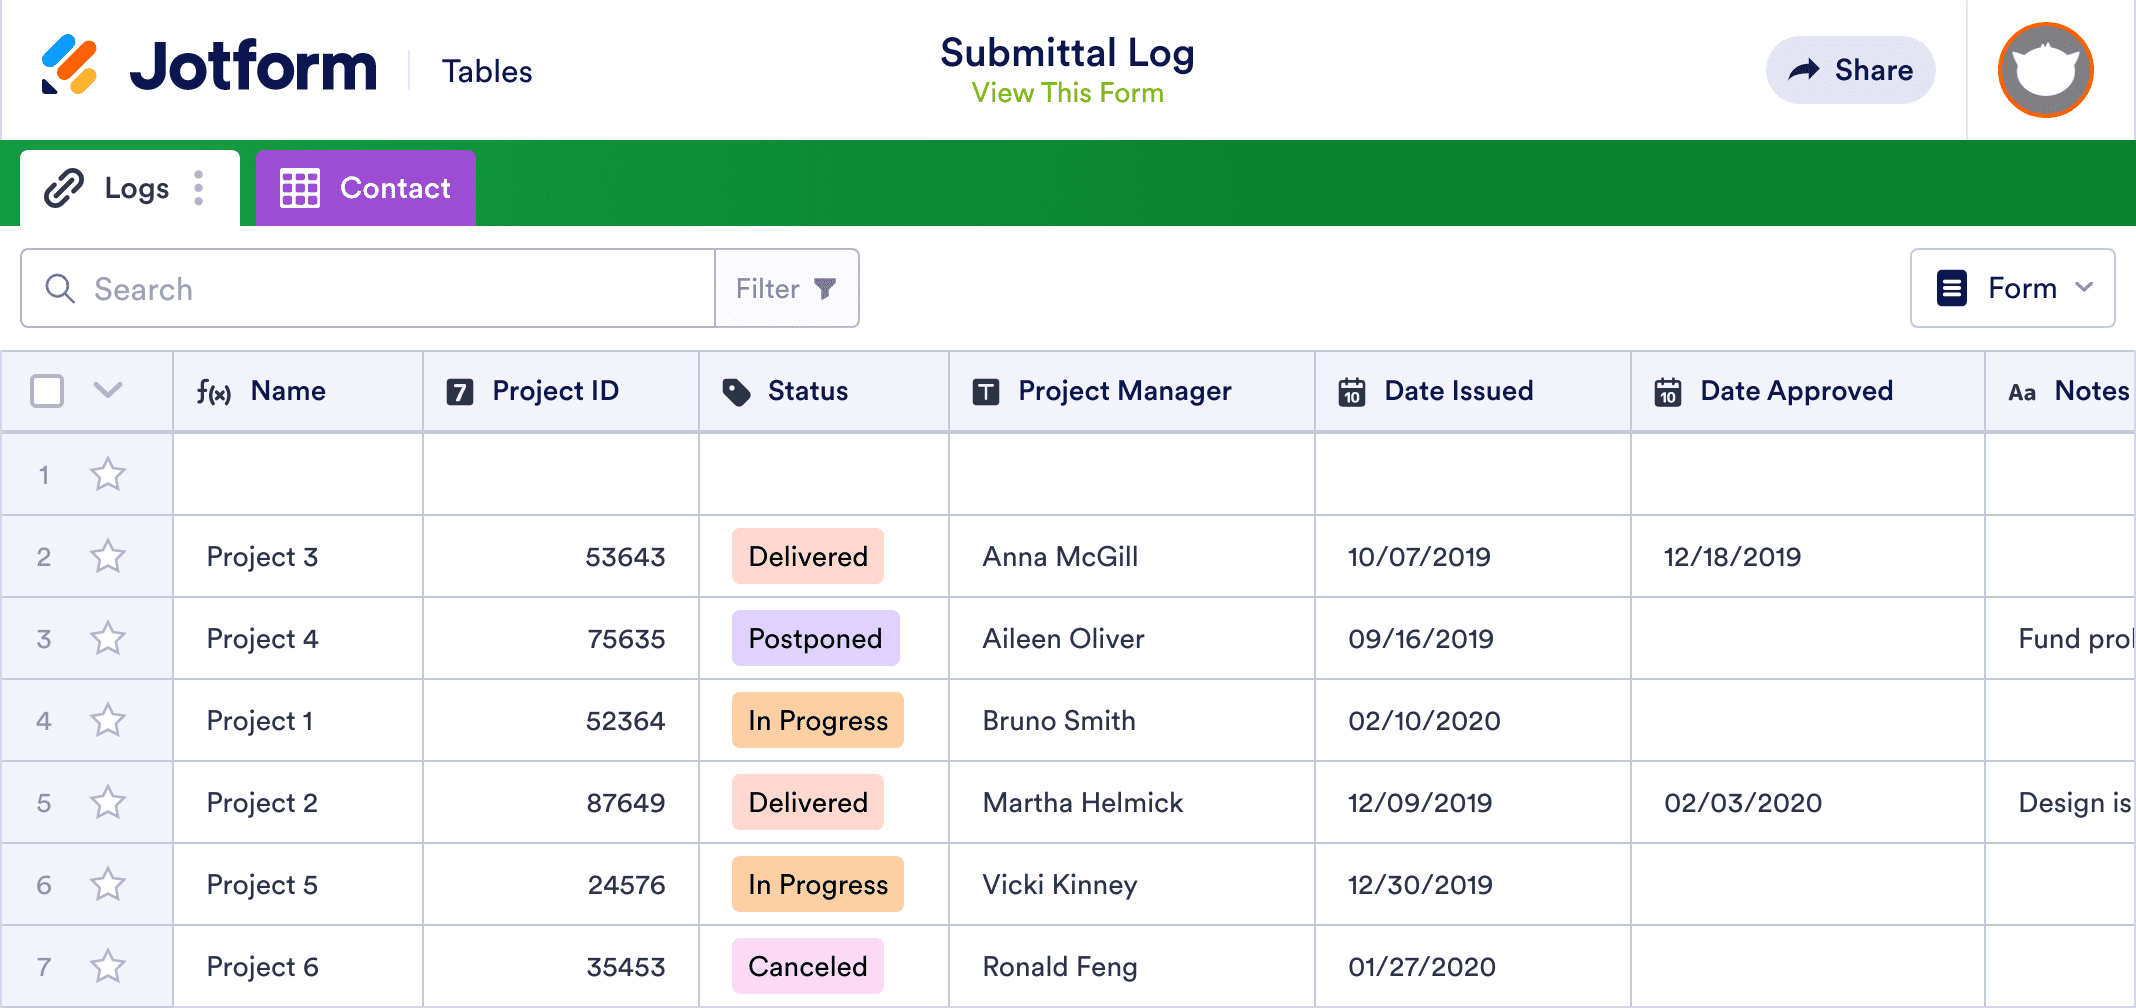 Submittal Log Template | Jotform Tables